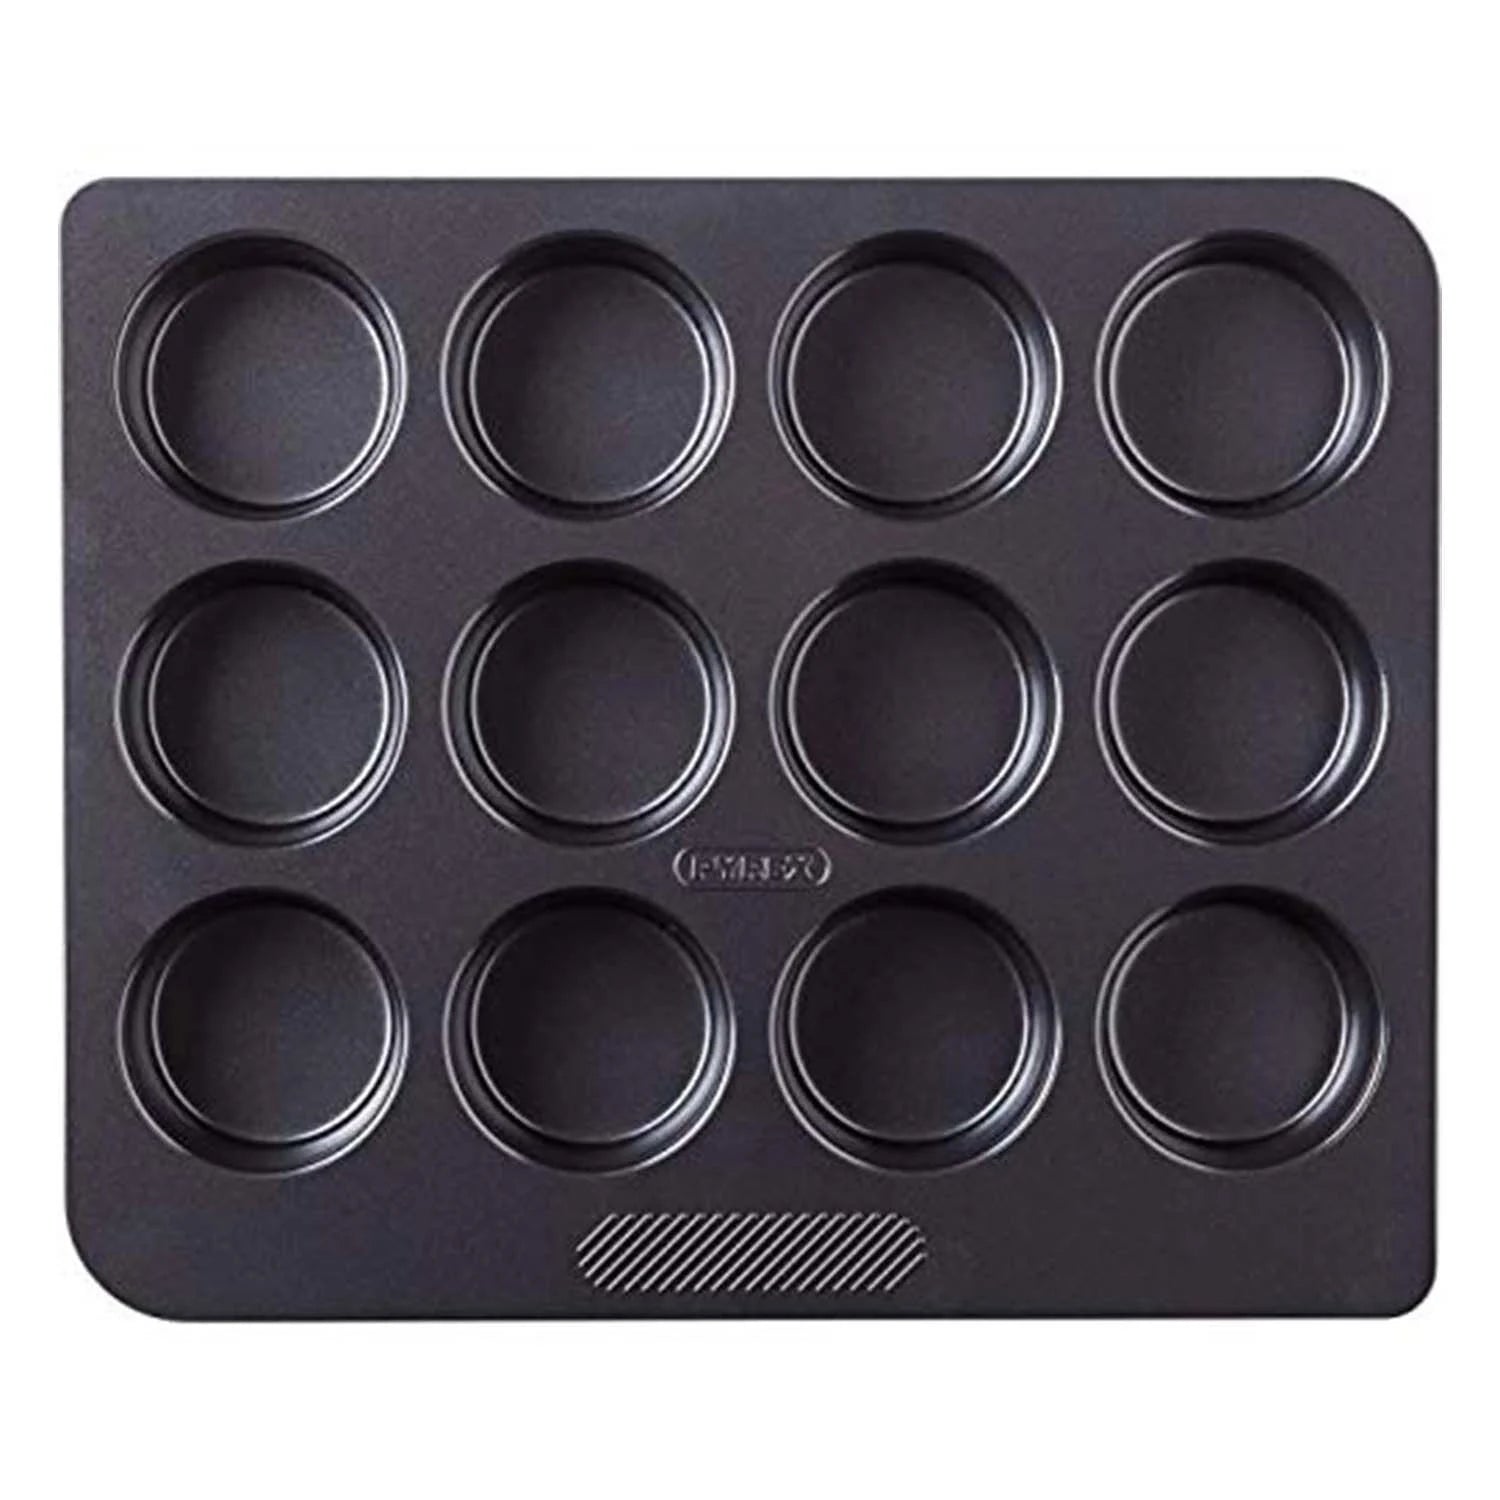 Pyrex 12 Cup Muffin Tray